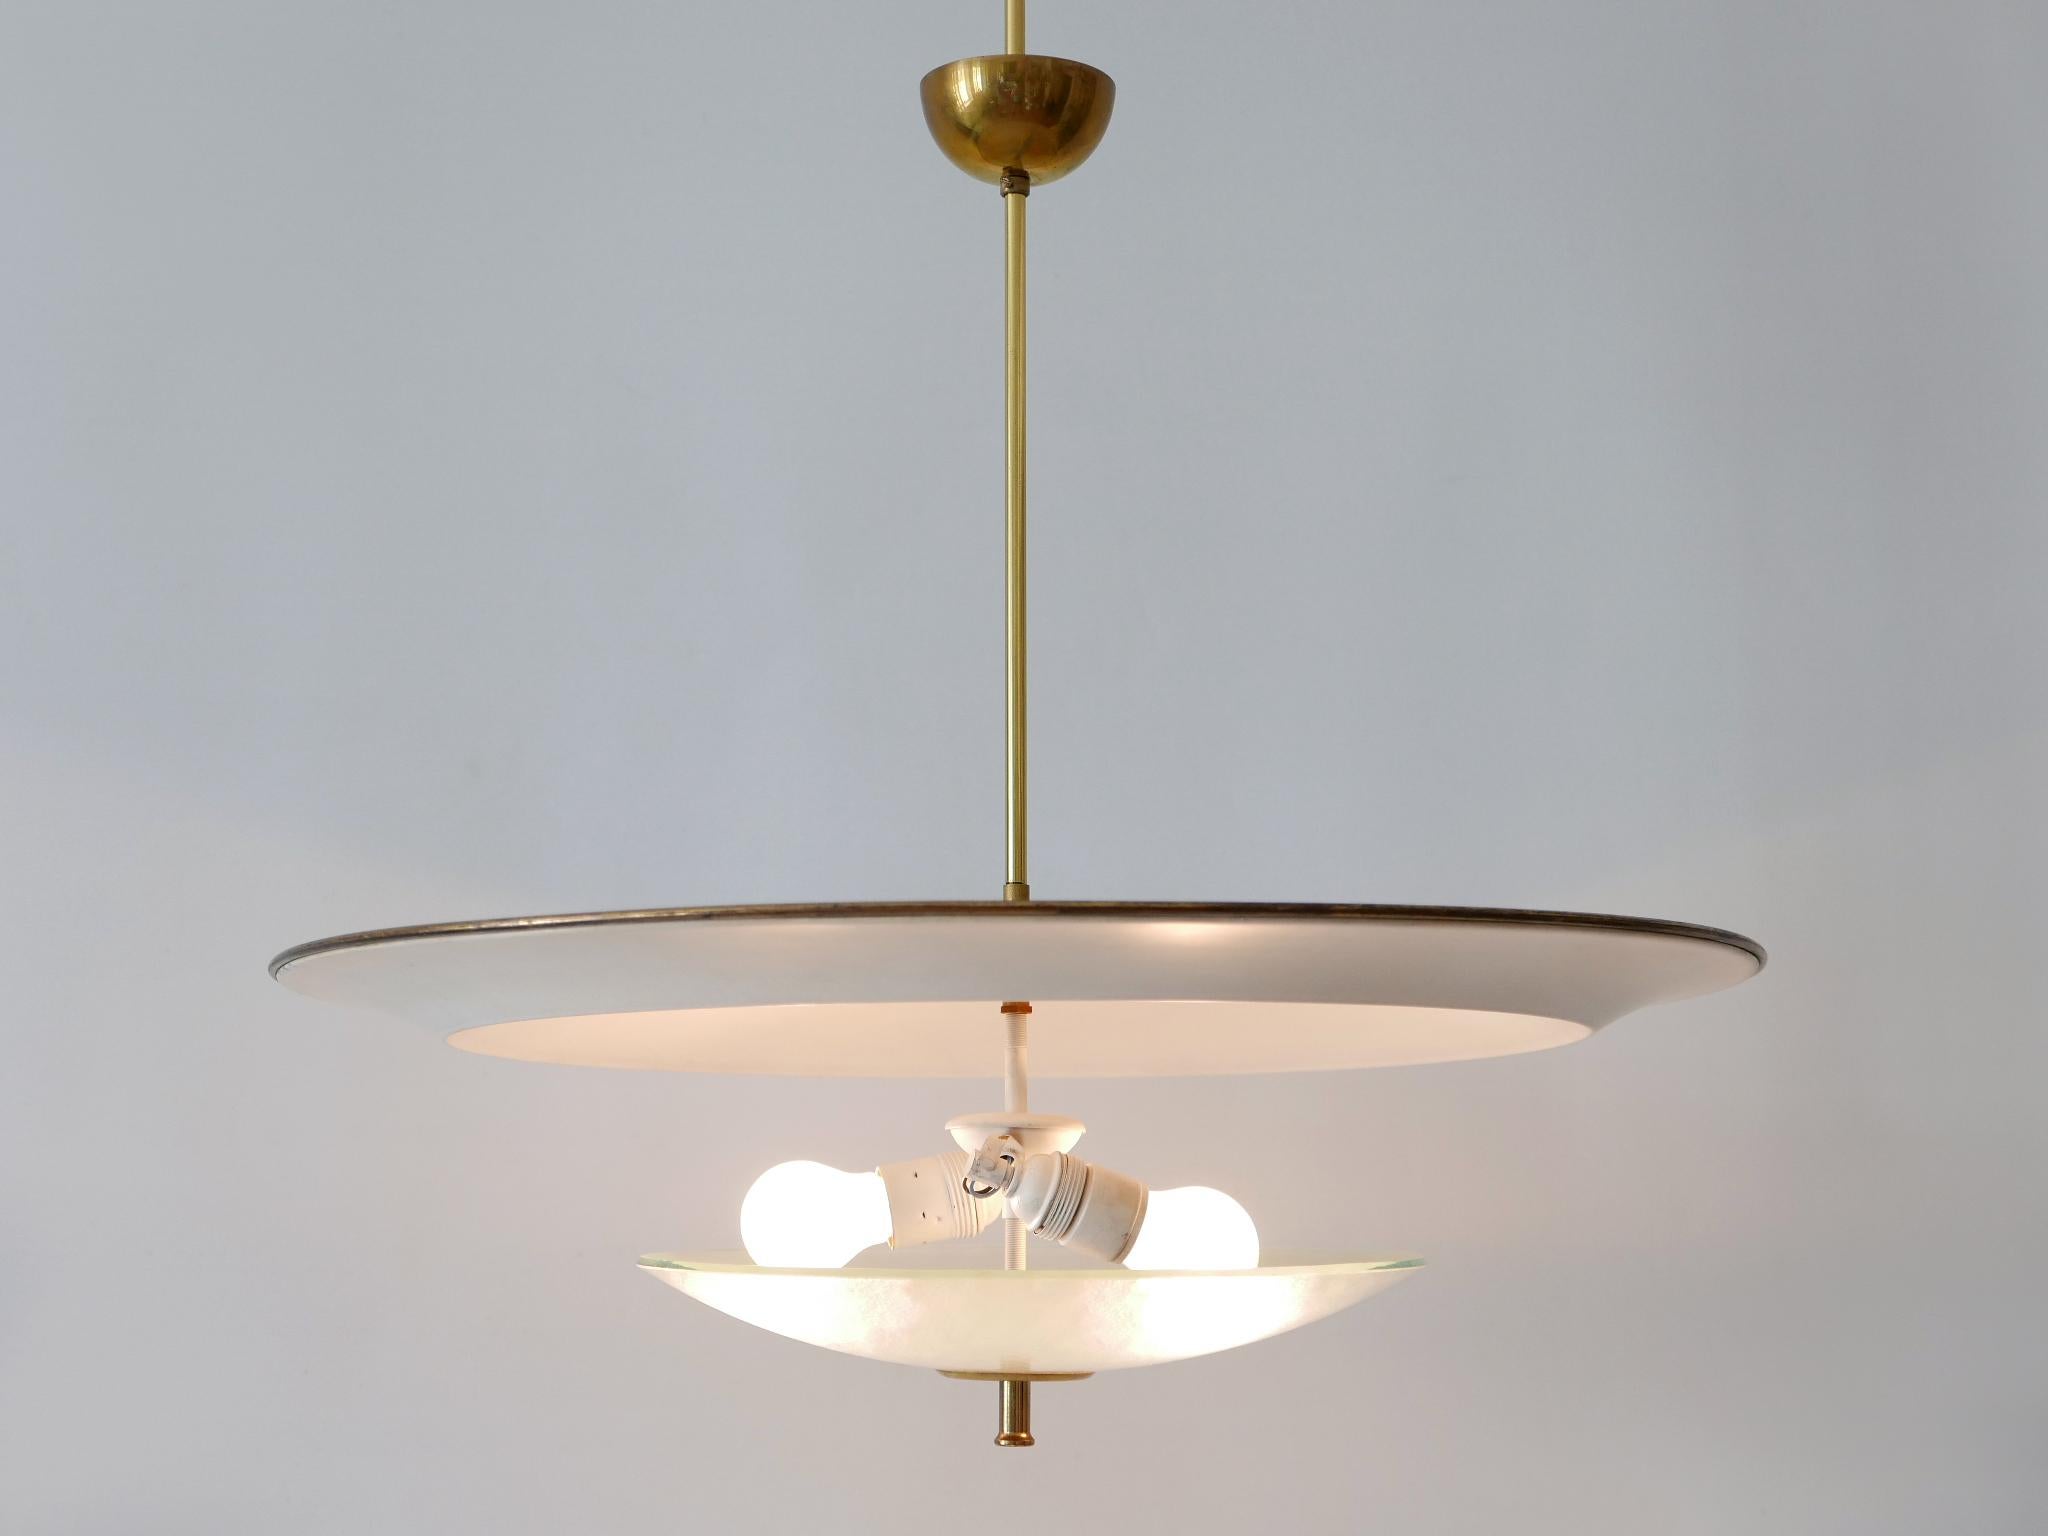 Large Mid-Century Modern 'Ufo' Ceiling Light or Pendant Lamp Germany 1950s № 3 For Sale 4